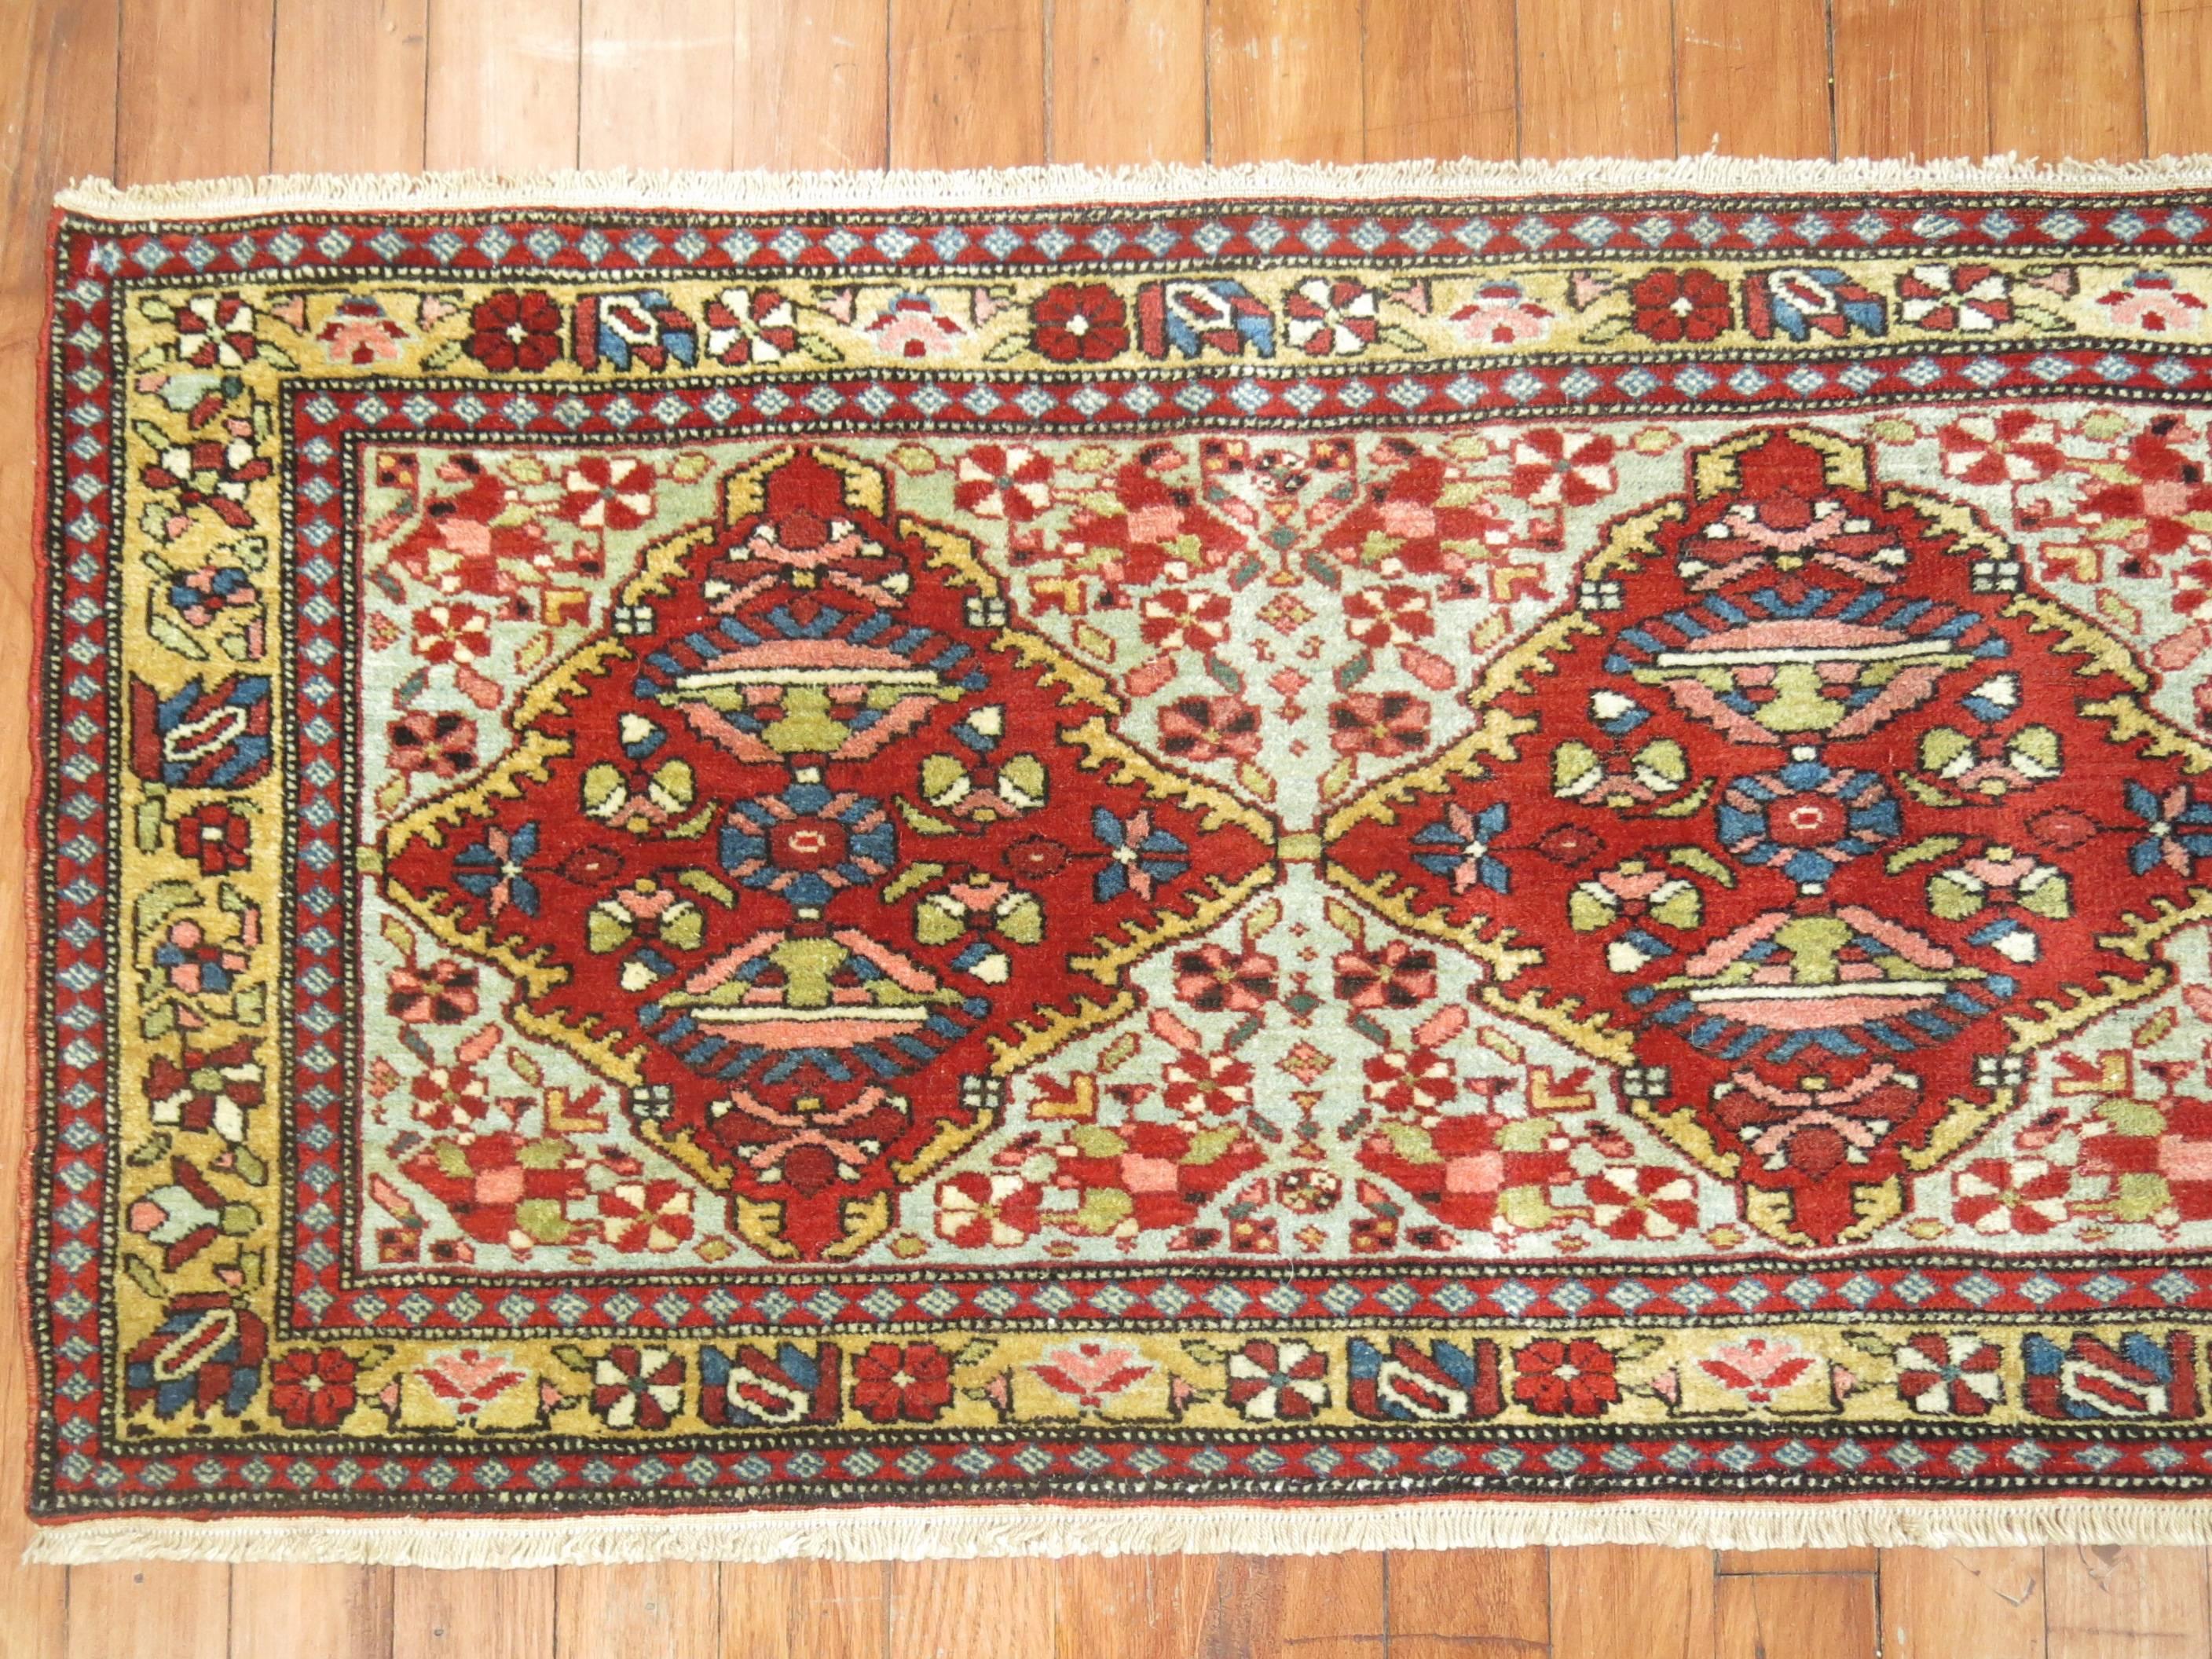 An early 20th century horizontally handwoven Persian Malayer rug with a green field, accents in red and gold

Measures: 1'7